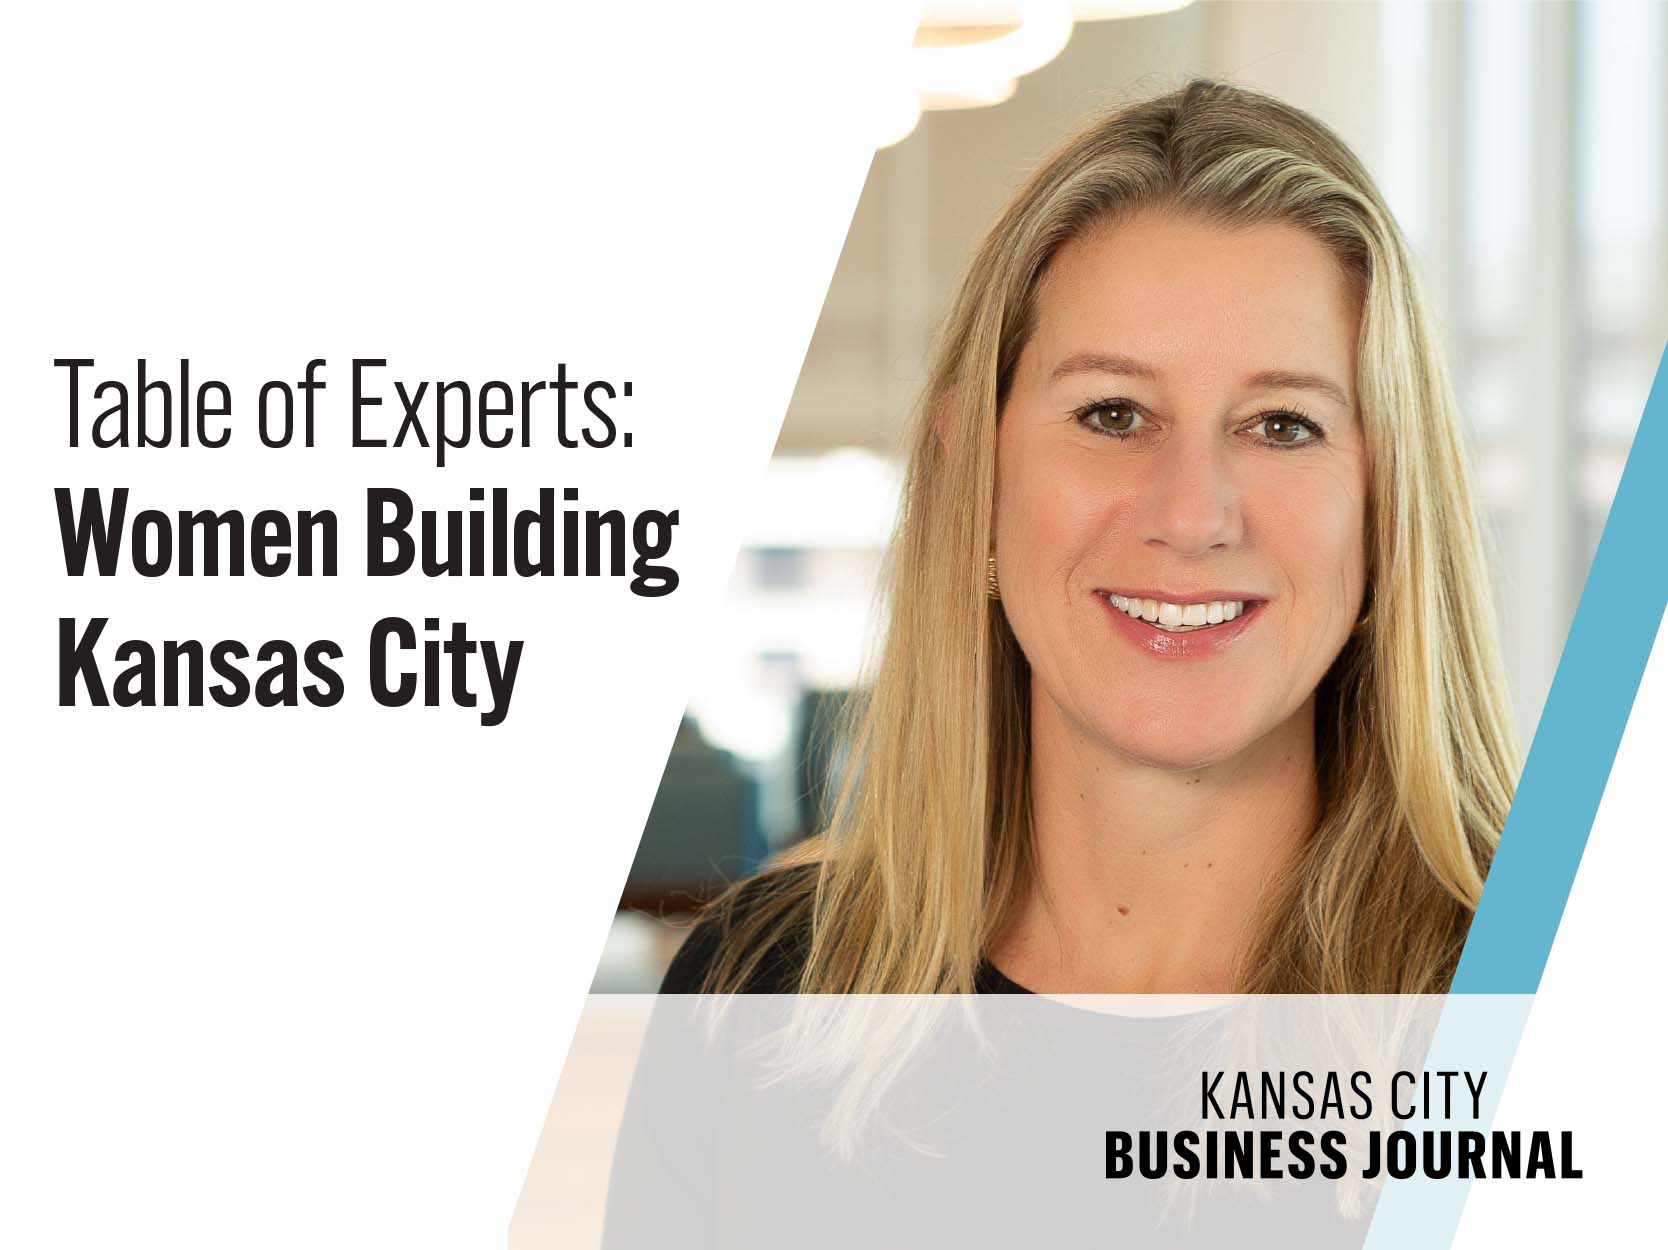 Table of Experts: Women Building KC — Strategies to Attract More Workers to Architecture, Engineering & Construction